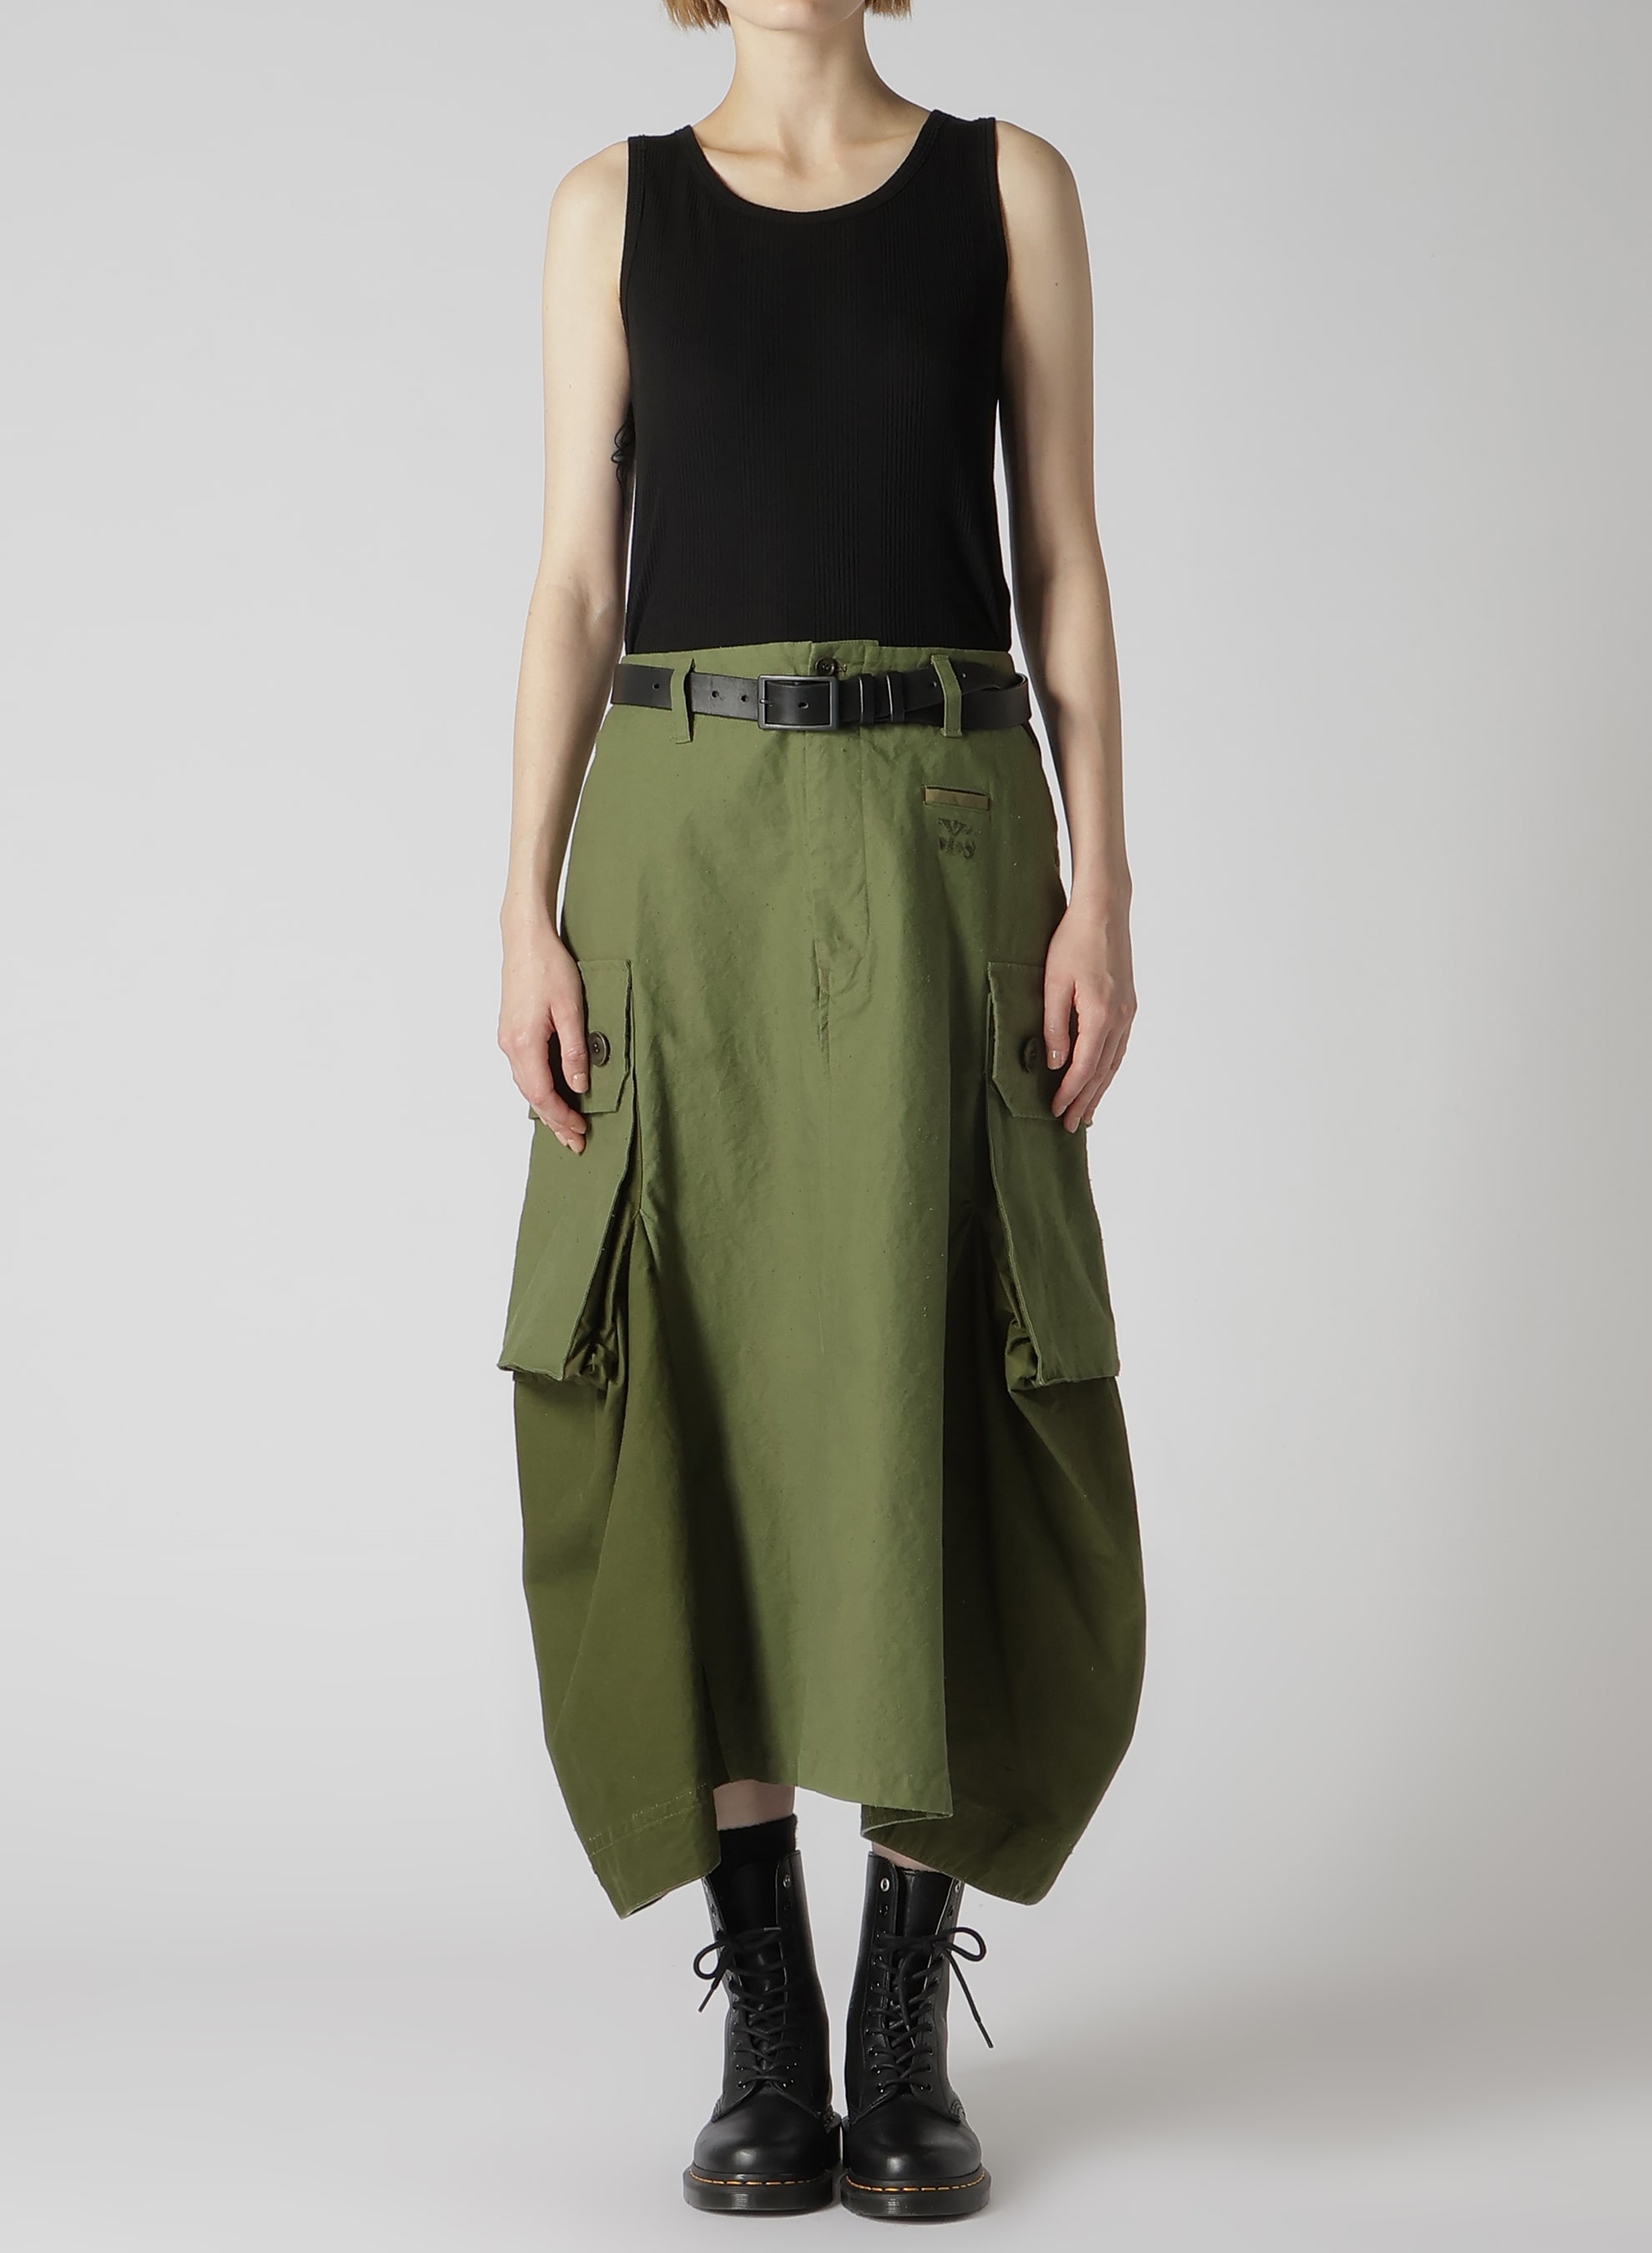 MILITARY TENT CLOTH CARGO PANTS-STYLE SKIRT